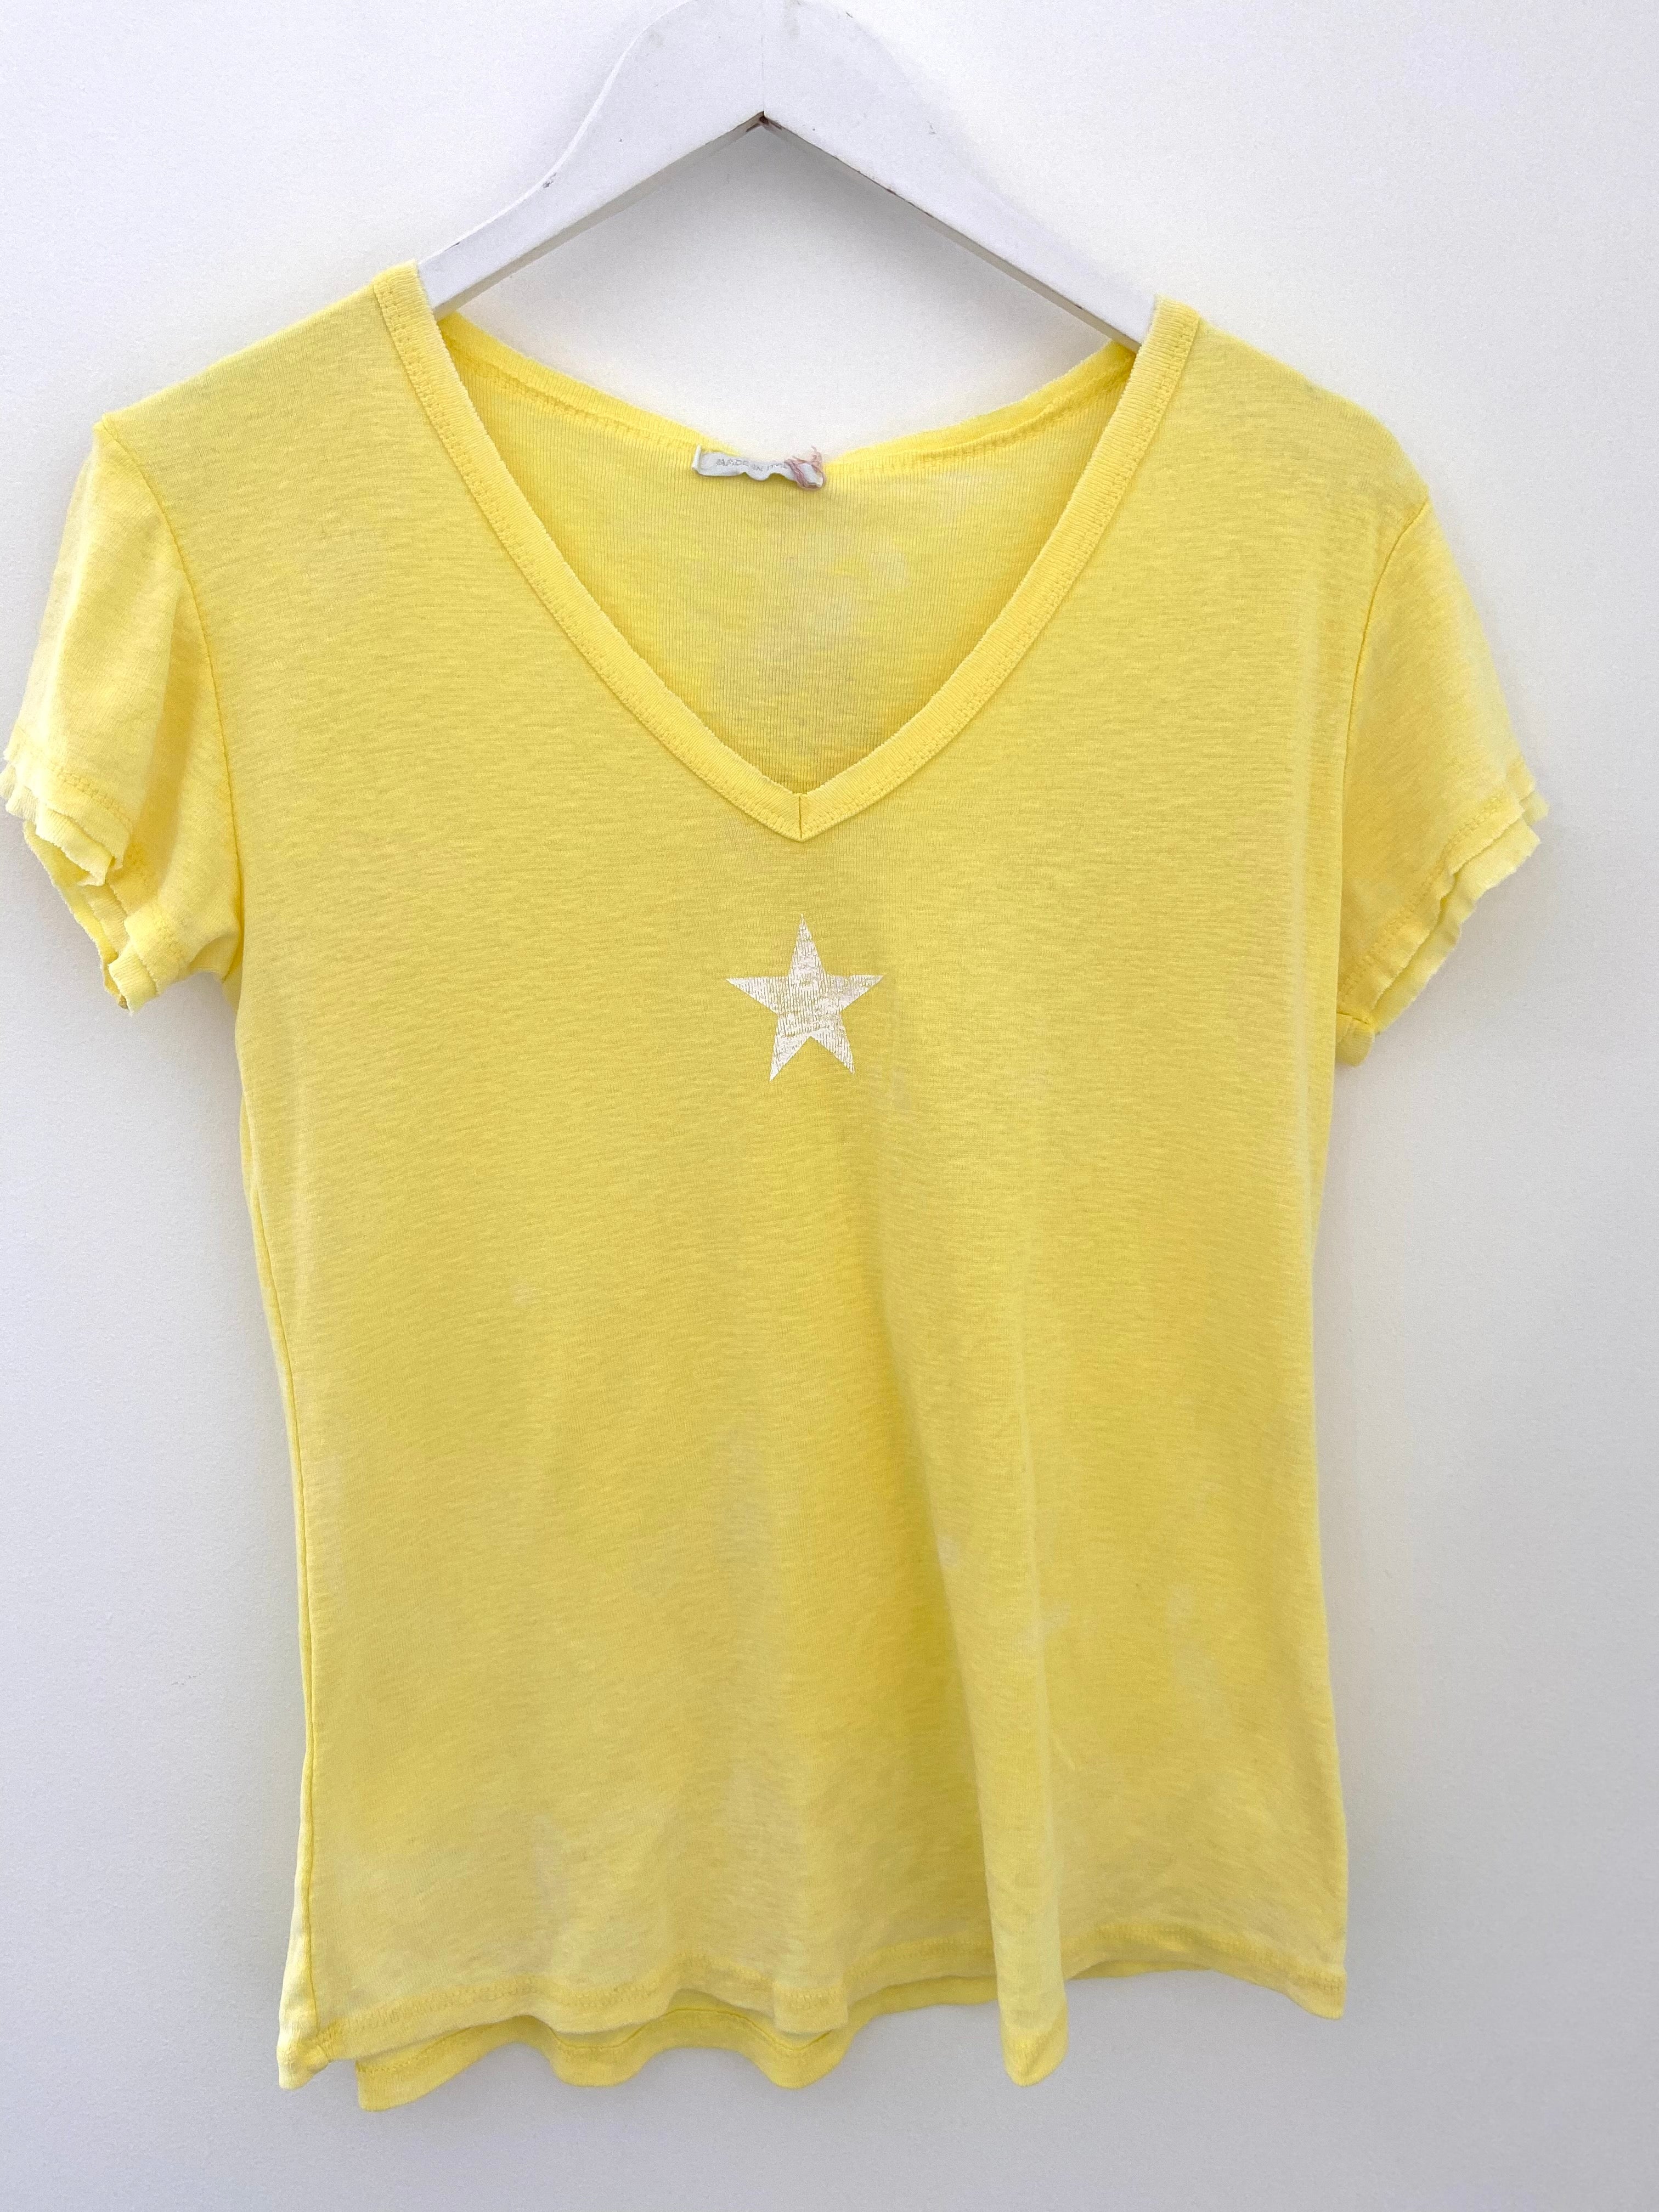 Vintage Star Tee in Yellow